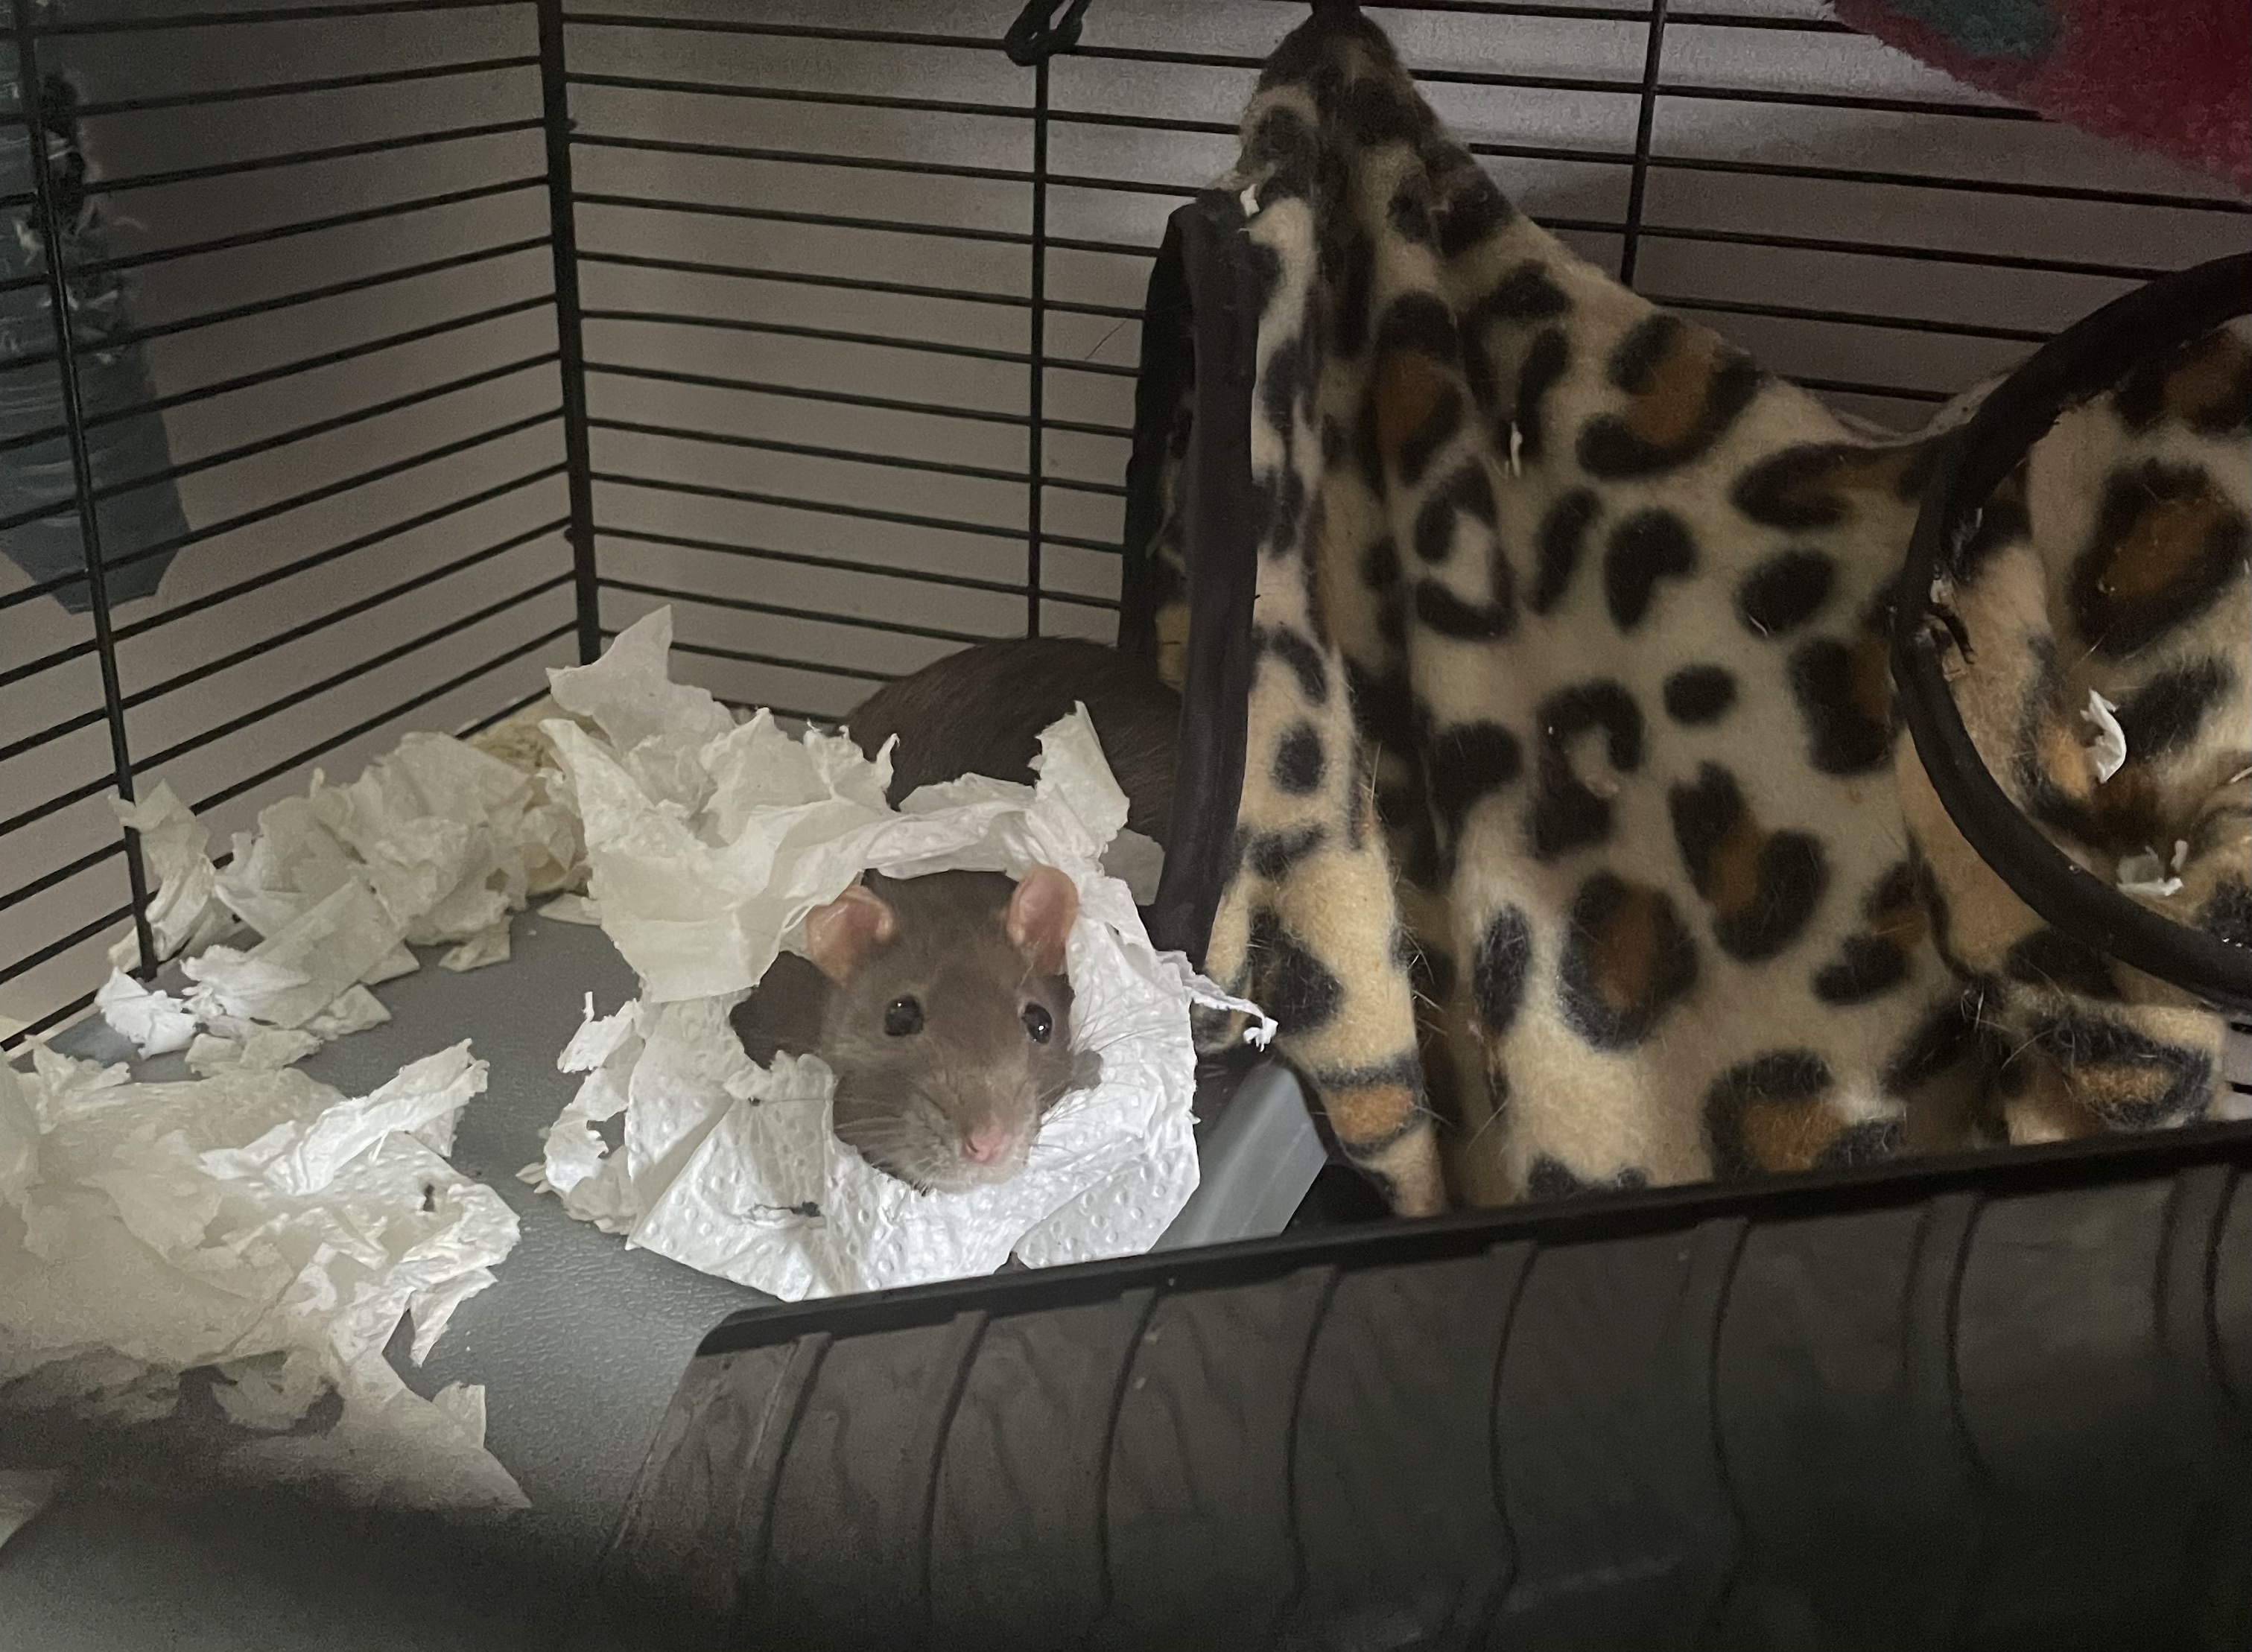 Chrissy the rat with hear head poking out through a piece of paper towel